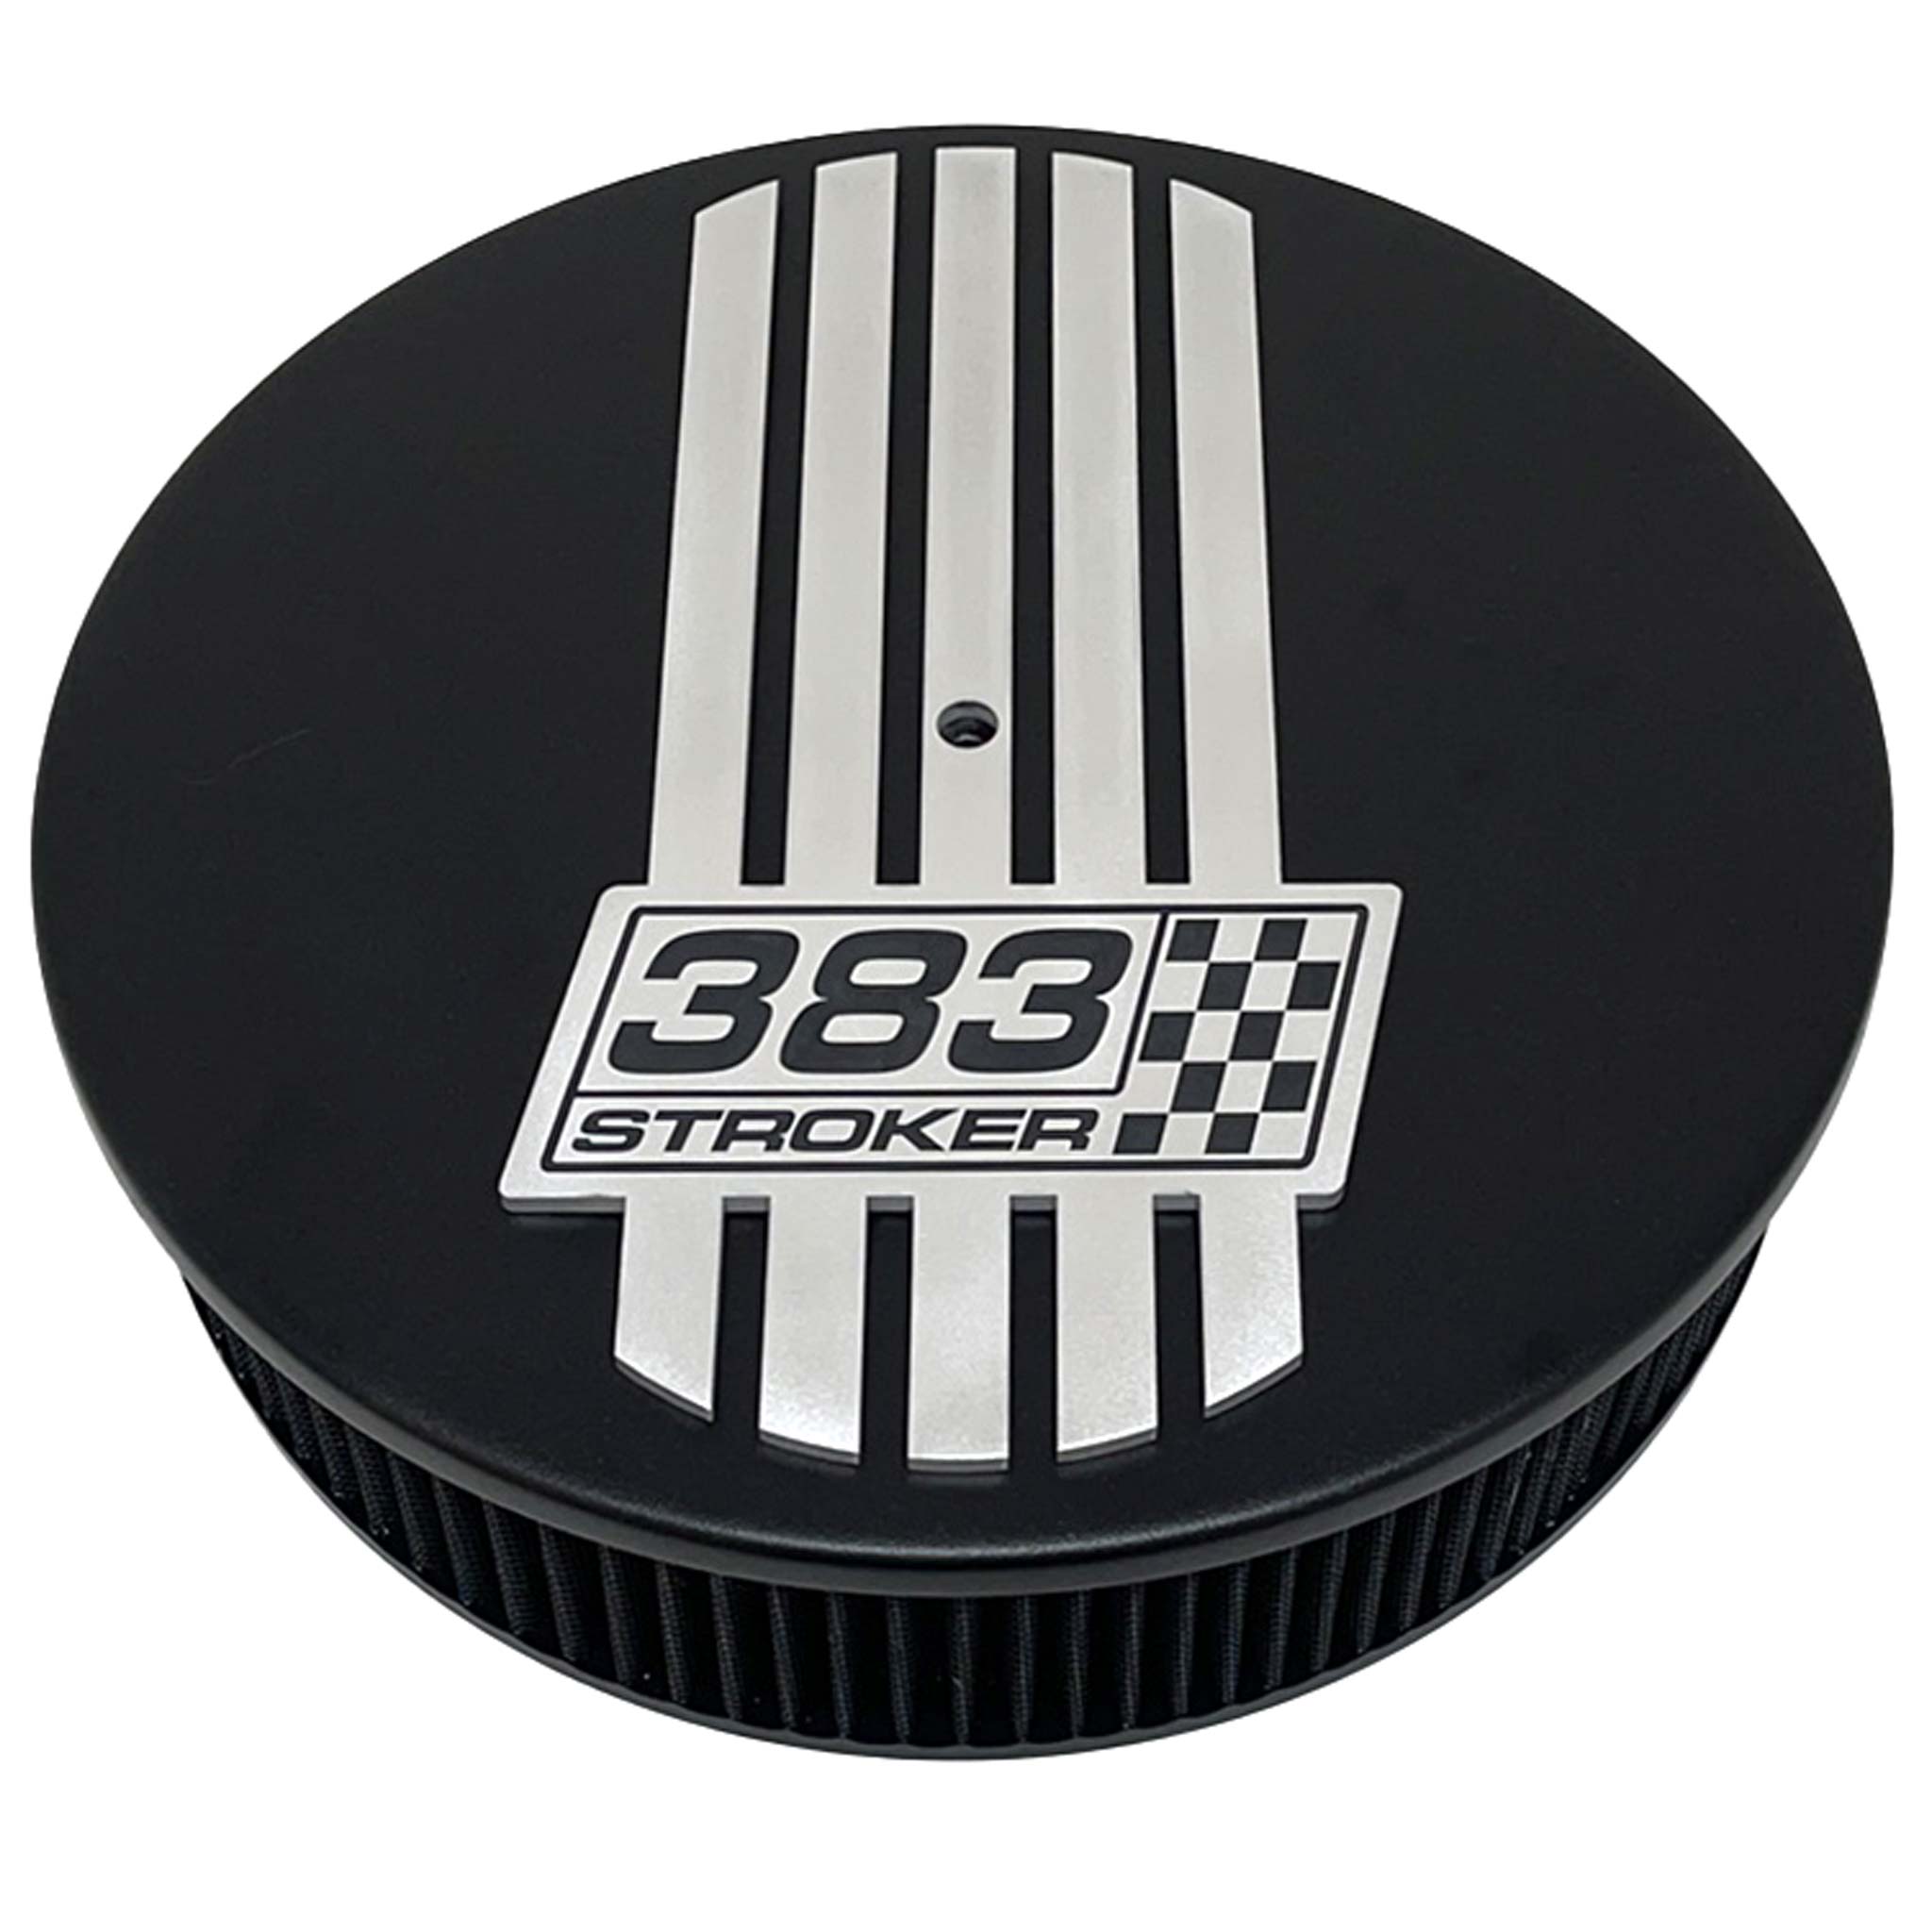 383 Stroker Ghost BowTie Chevy or Ford 12 Inch Oval Air Cleaner K&N Element